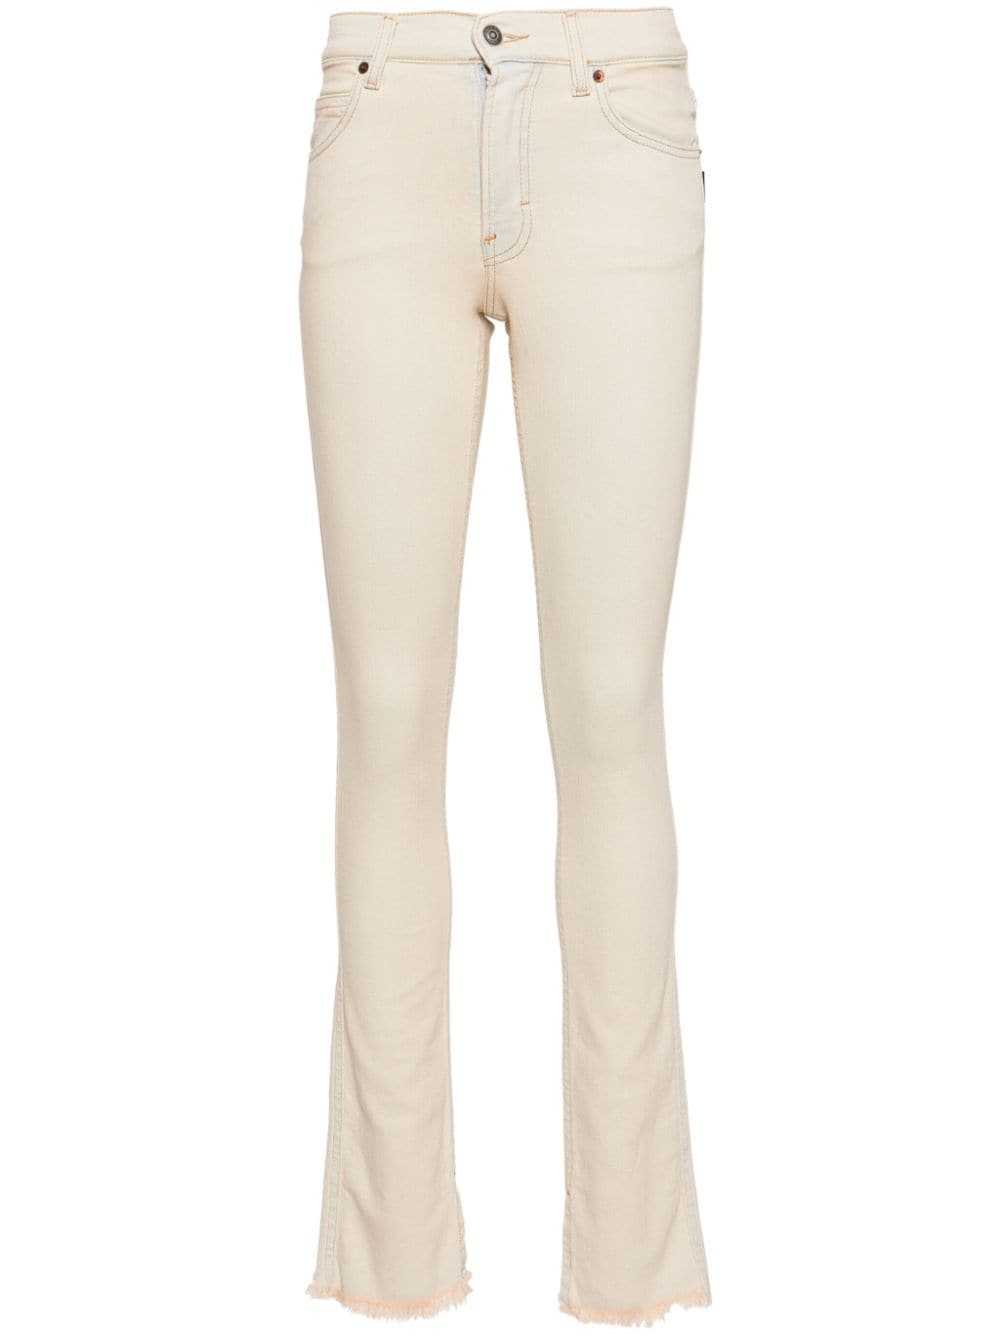 Sherry mid-rise skinny jeans